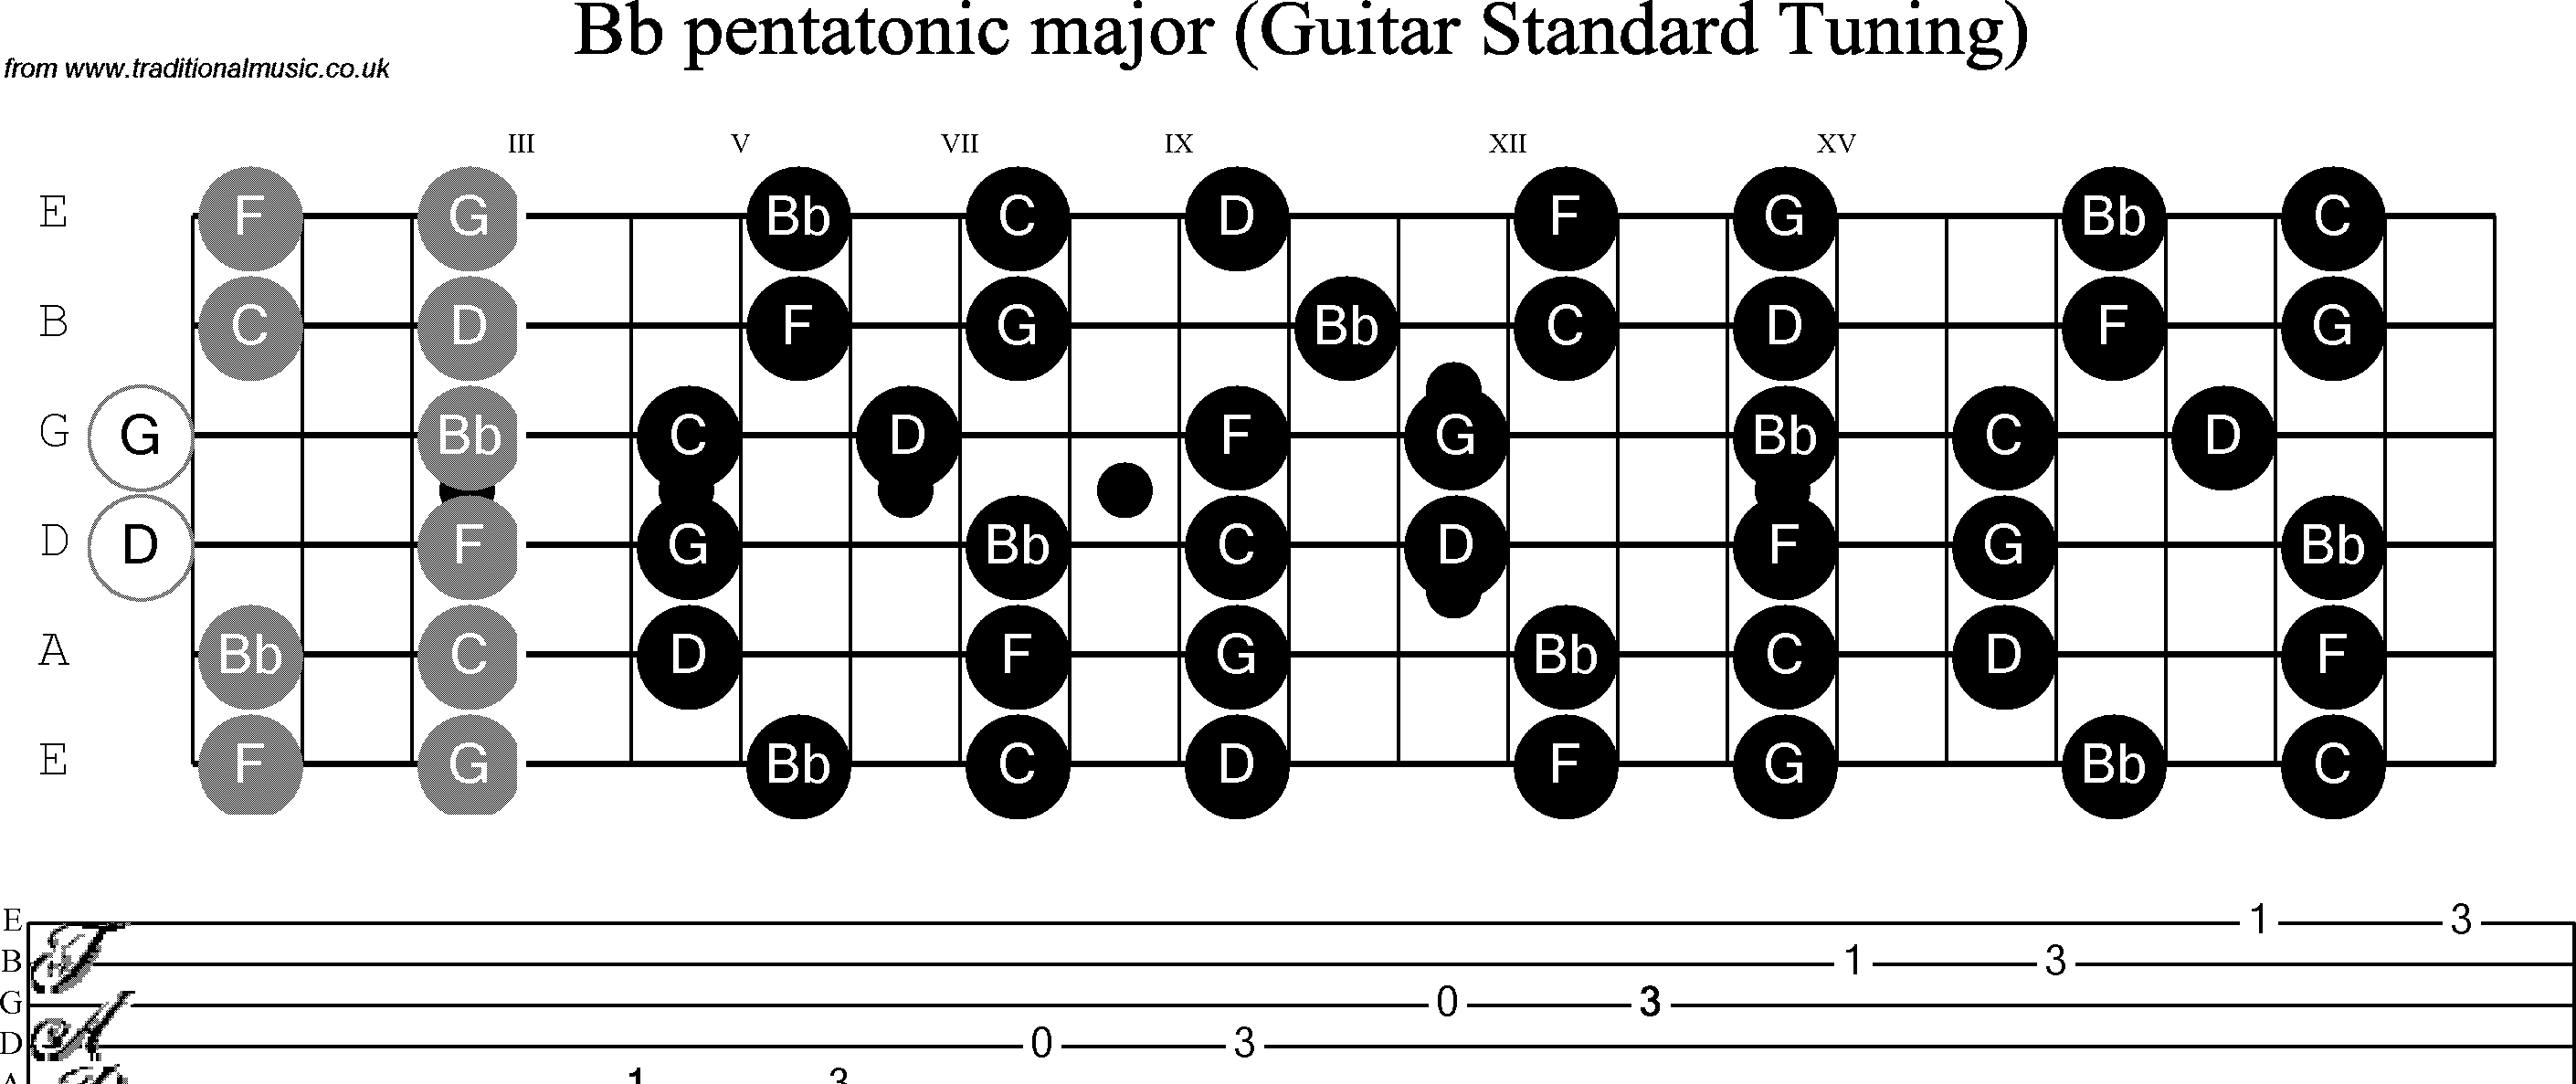 Scale, stave and neck diagram for Guitar: Bb Pentatonic